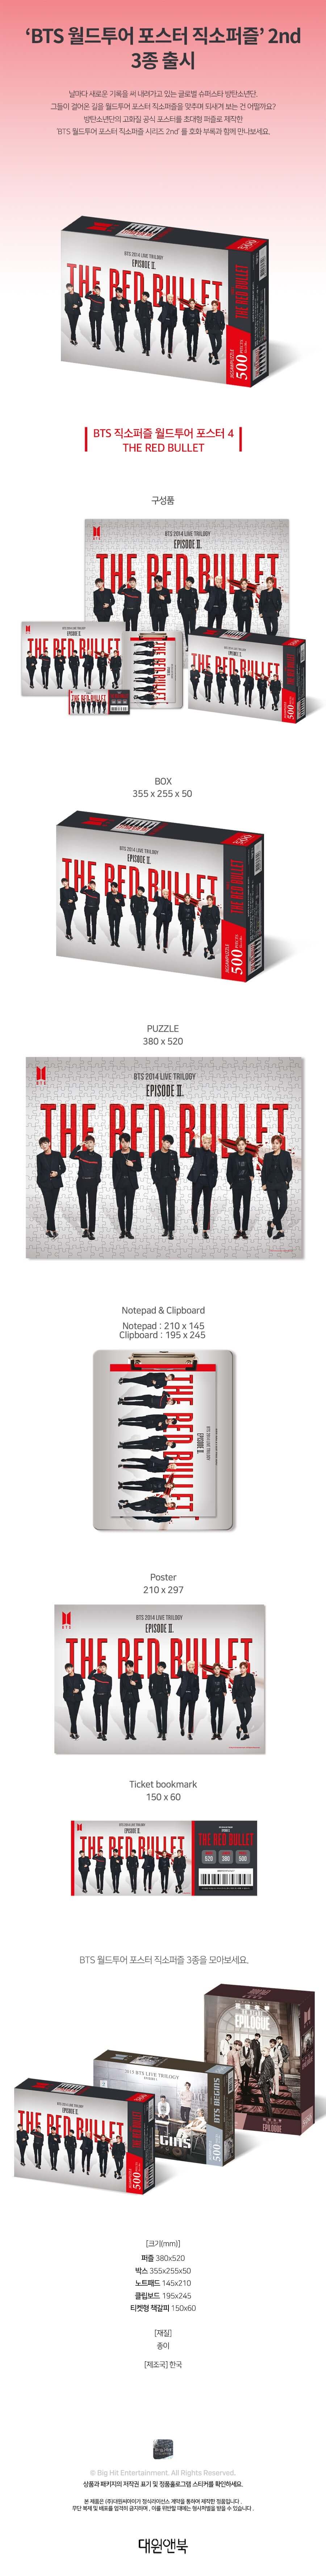 BTS Jigsaw Puzzle World Tour Poster 4: The Red Bullet